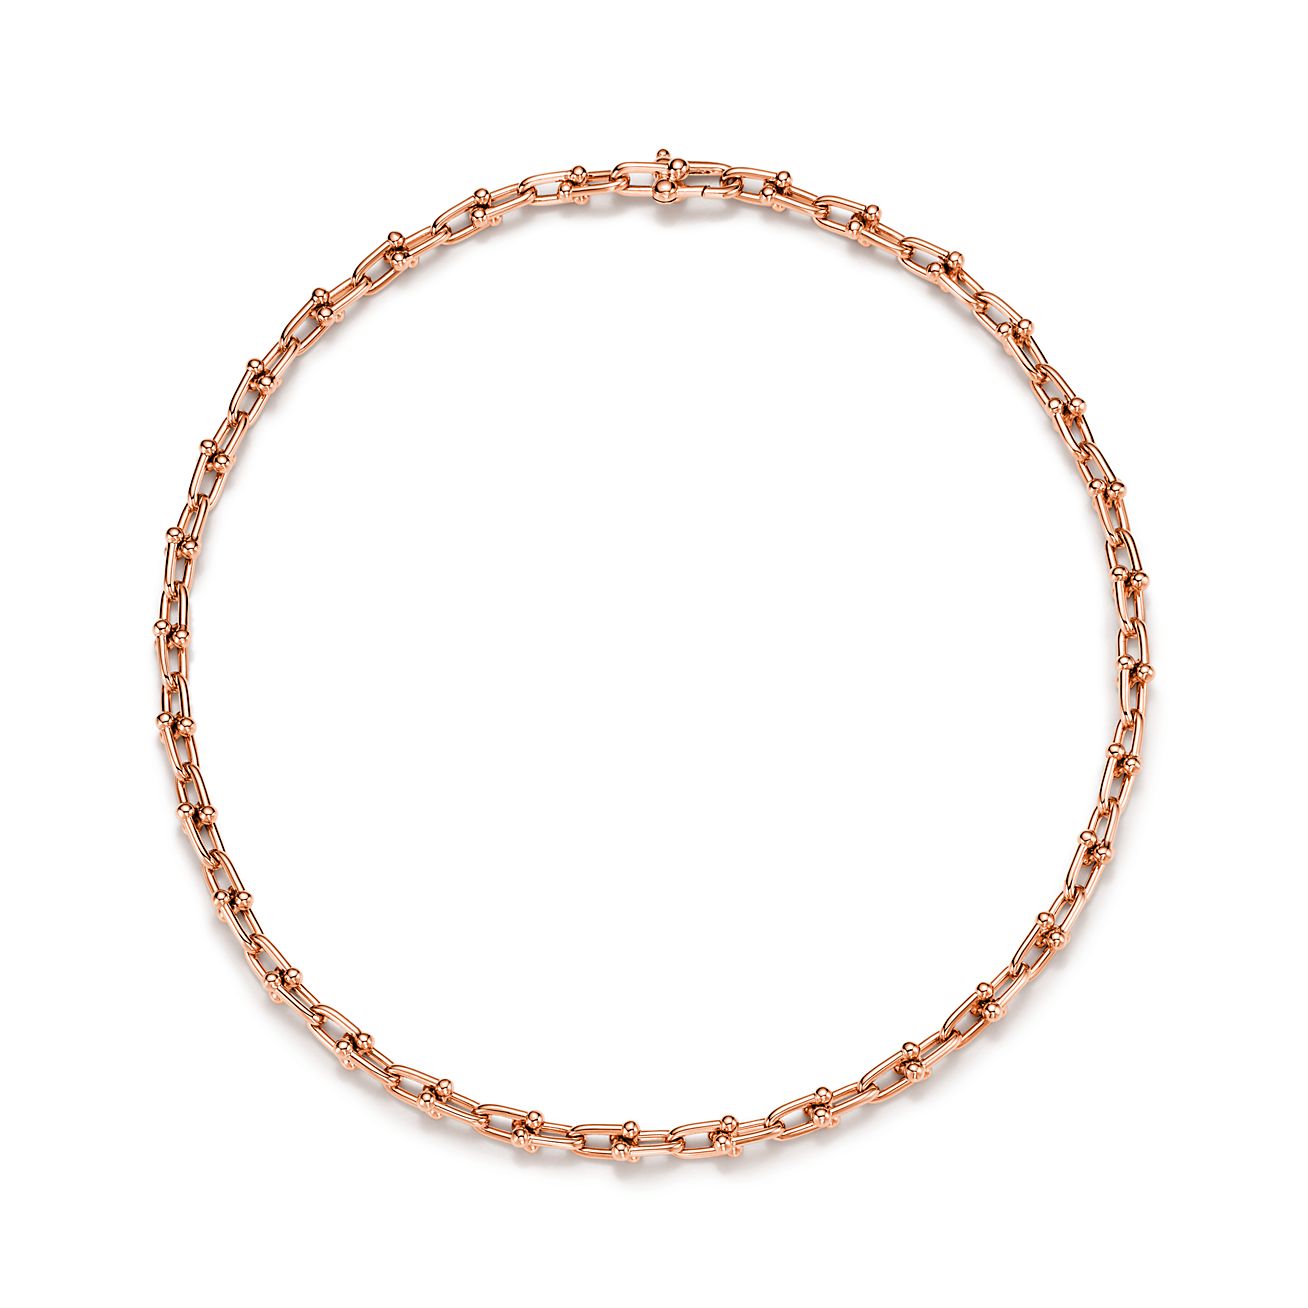 Tiffany HardWear Small Link Necklace in Rose Gold | Tiffany & Co.